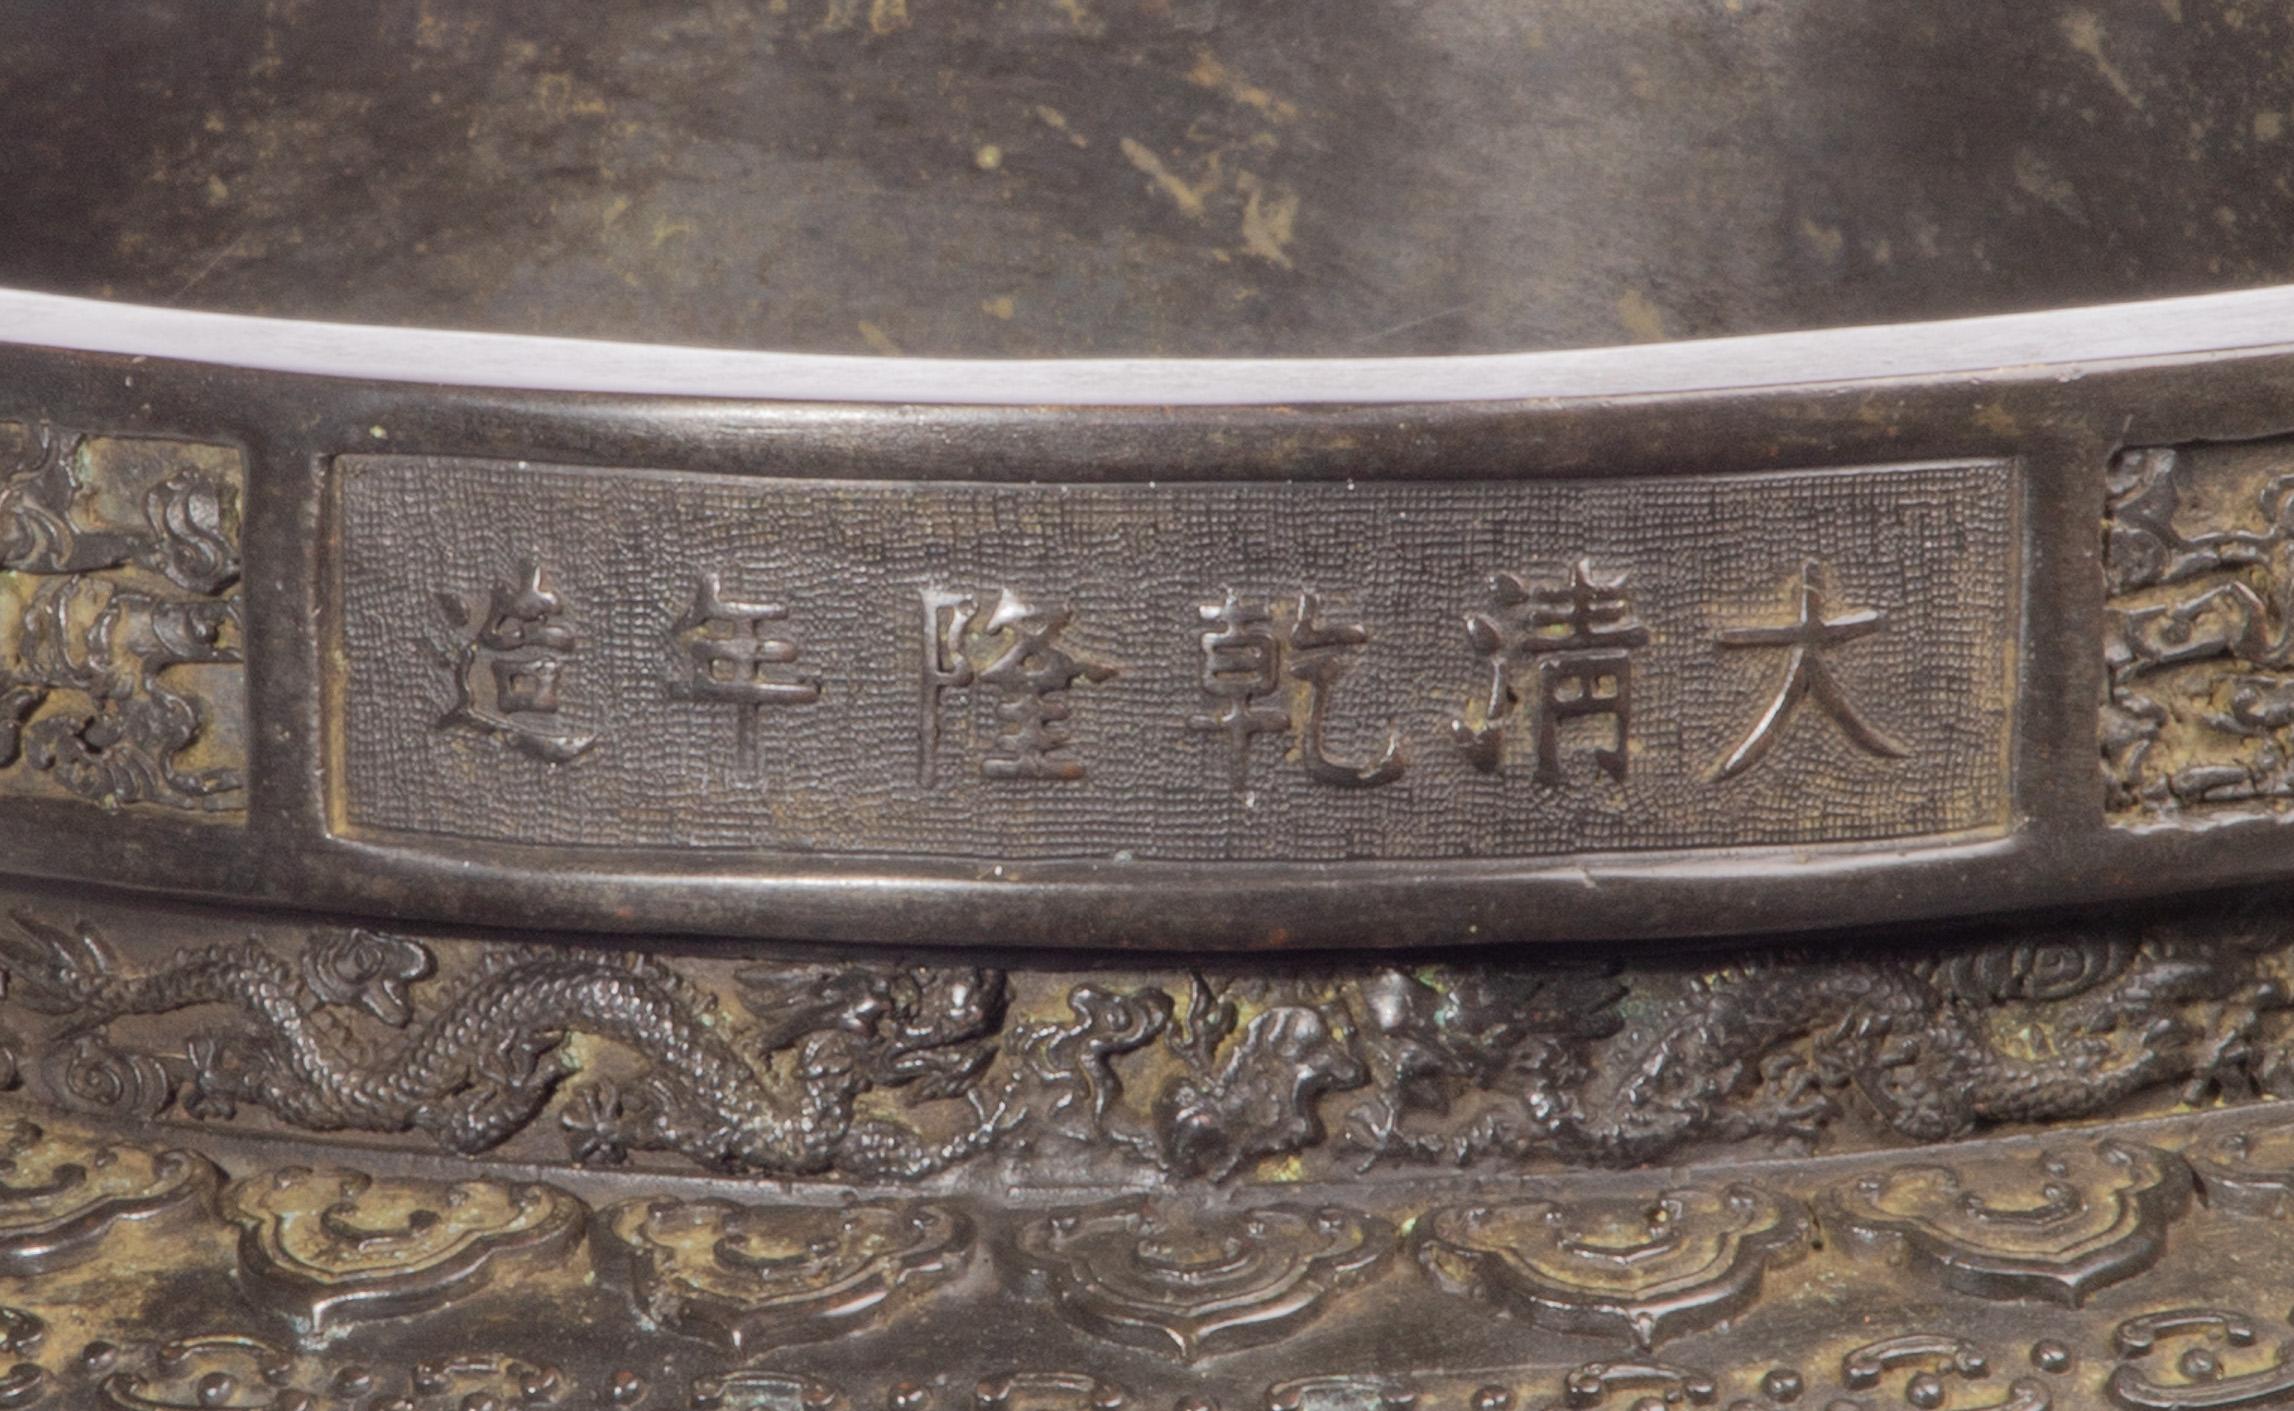 Chinese Ding Style Bronze Censer